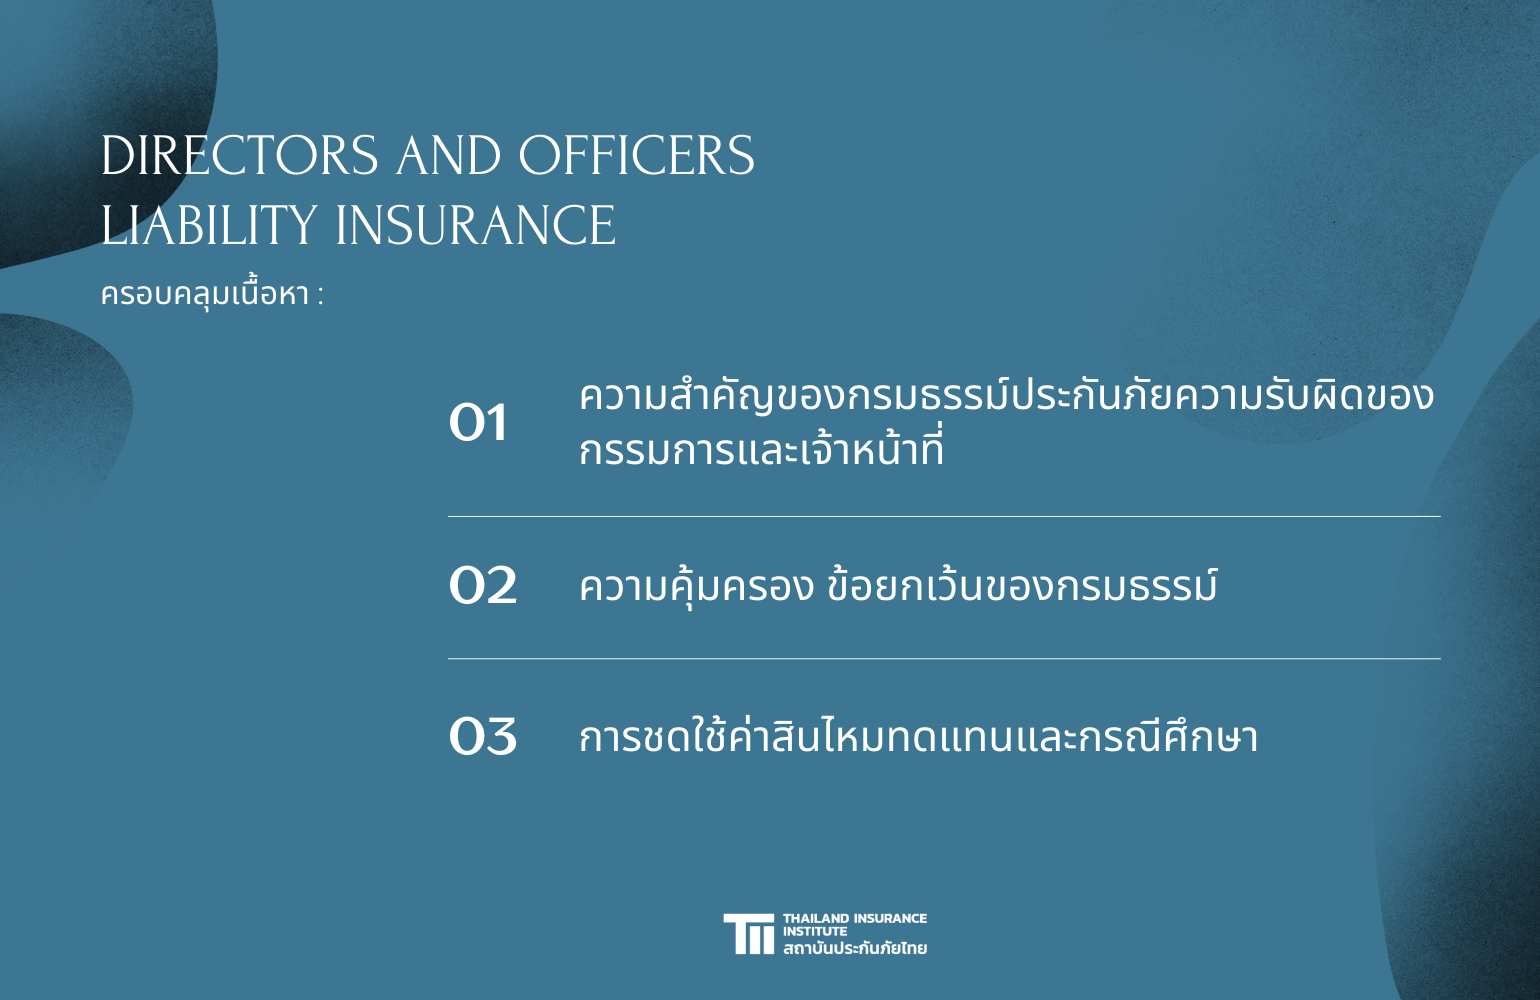 PR_Directors and Officers Liability Insurance_2